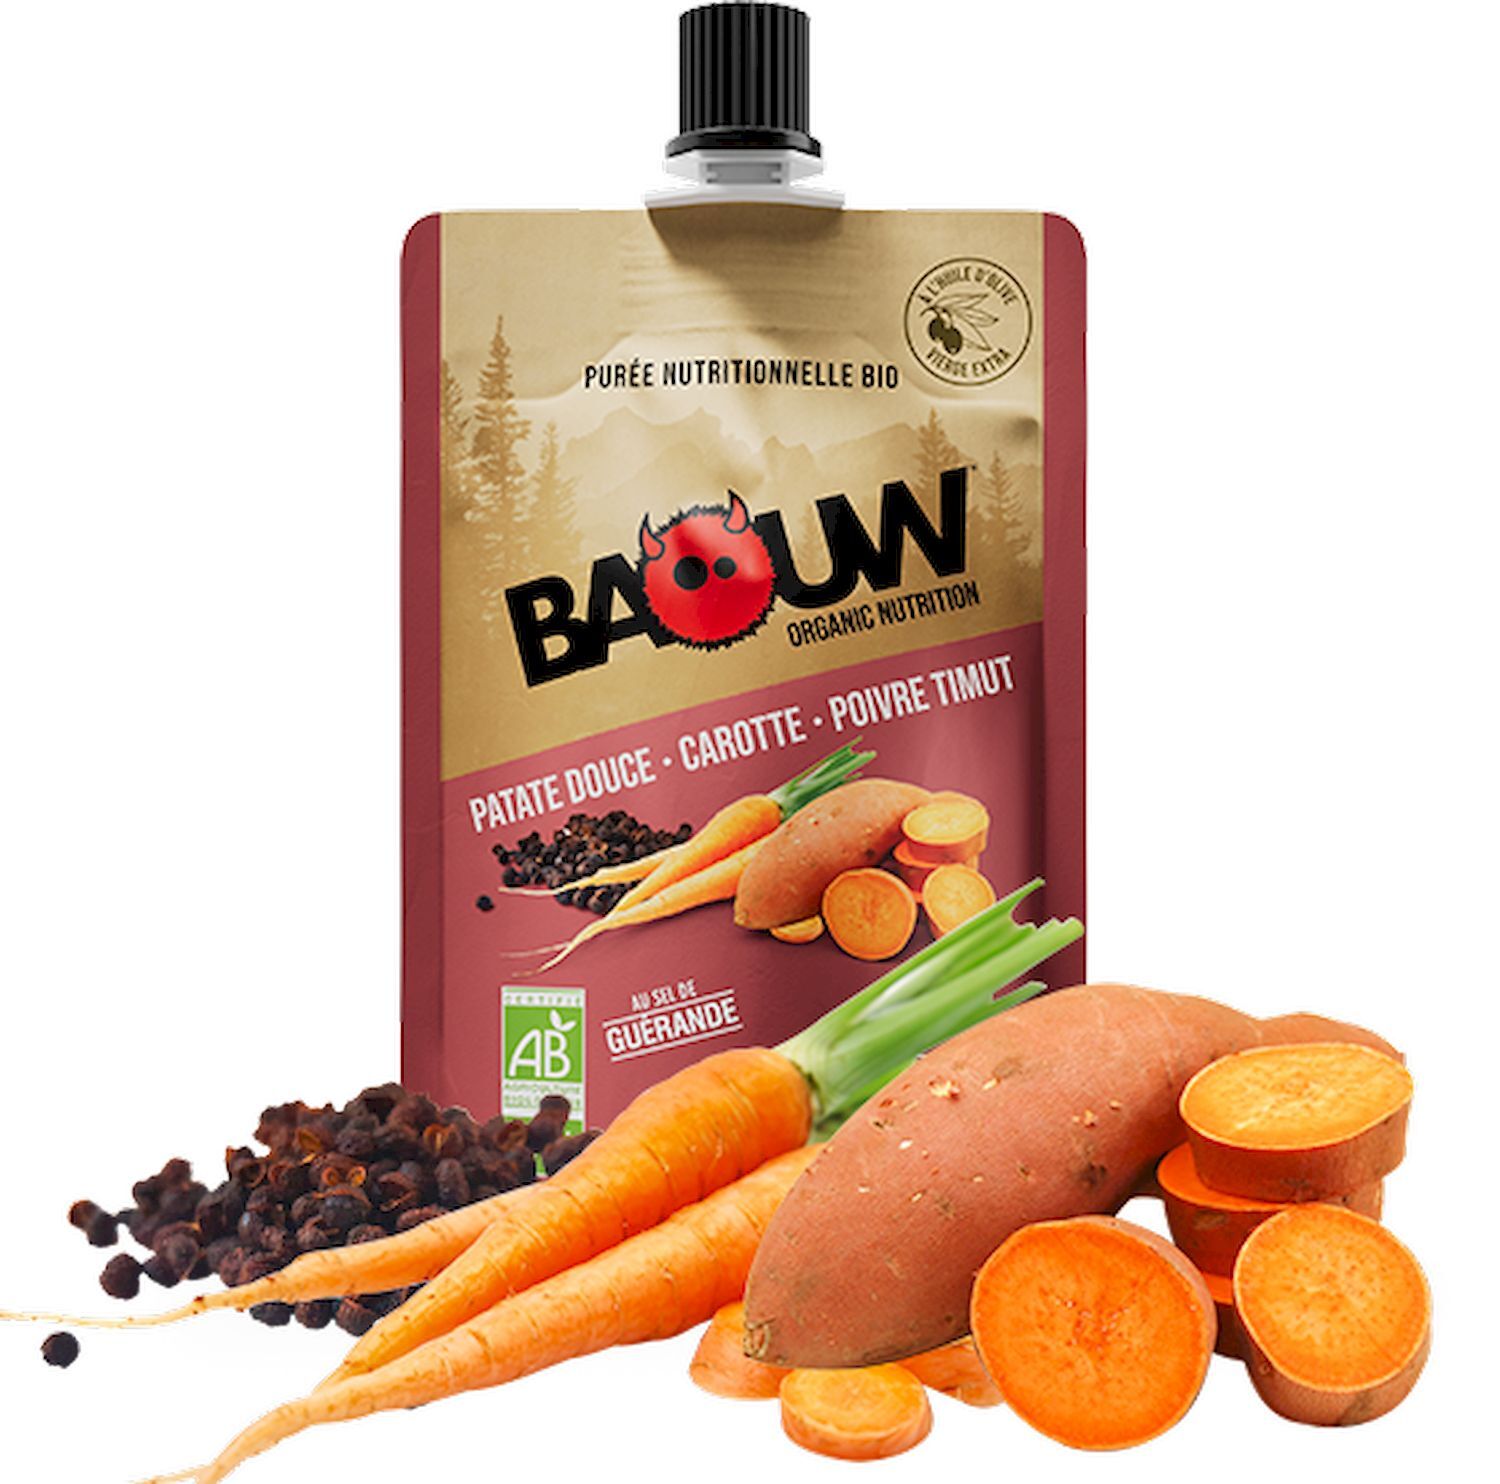 Baouw Patate Douce-Carotte-Poivre Timut - Energiecompotes & -purees | Hardloop